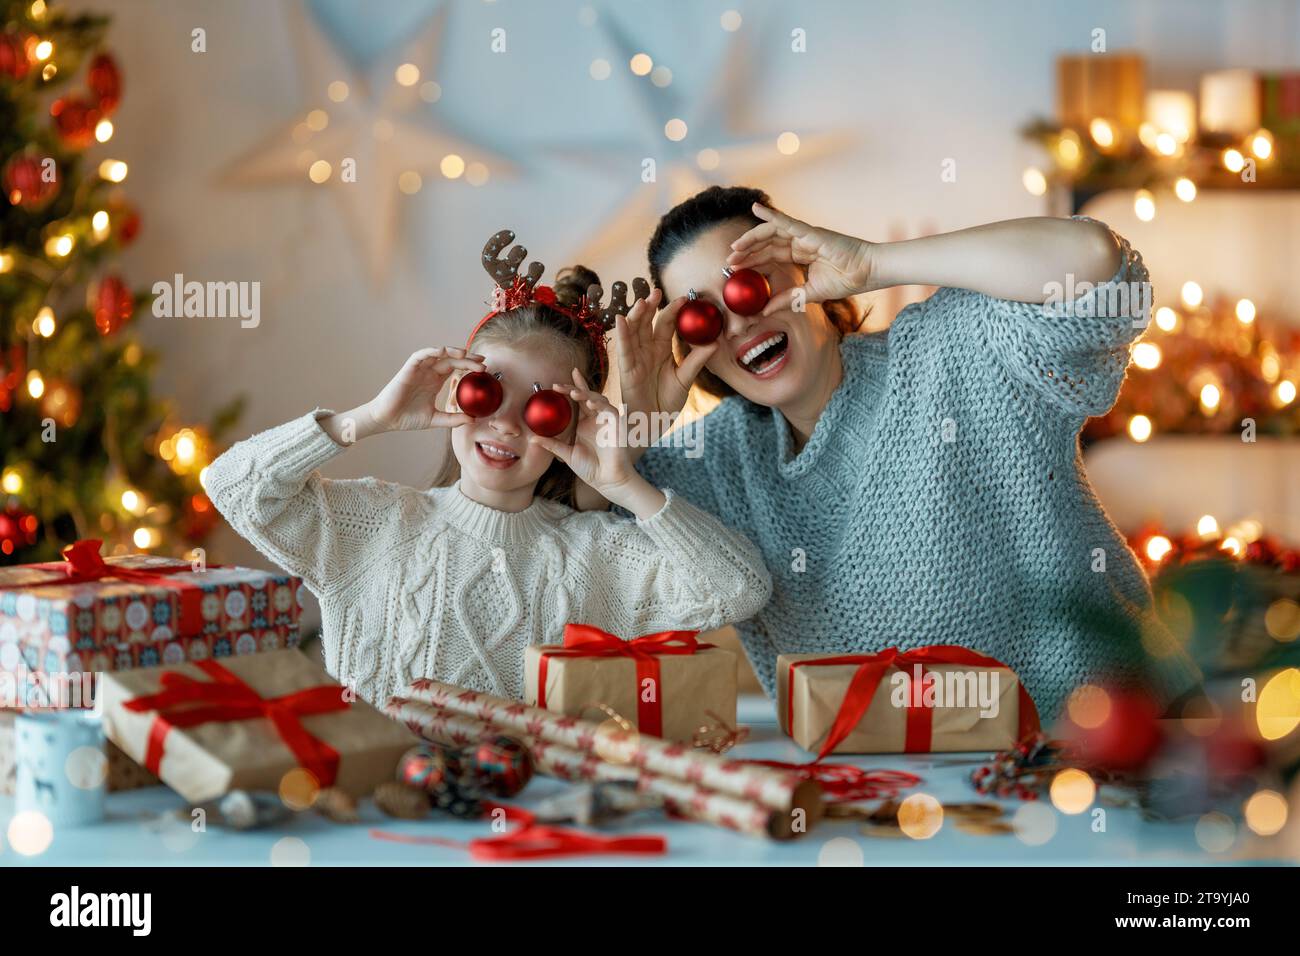 Happy Holidays. Cheerful mother and her cute daughter girl preparing for Christmas. People wrapping gifts, decorating home. Loving family with present Stock Photo